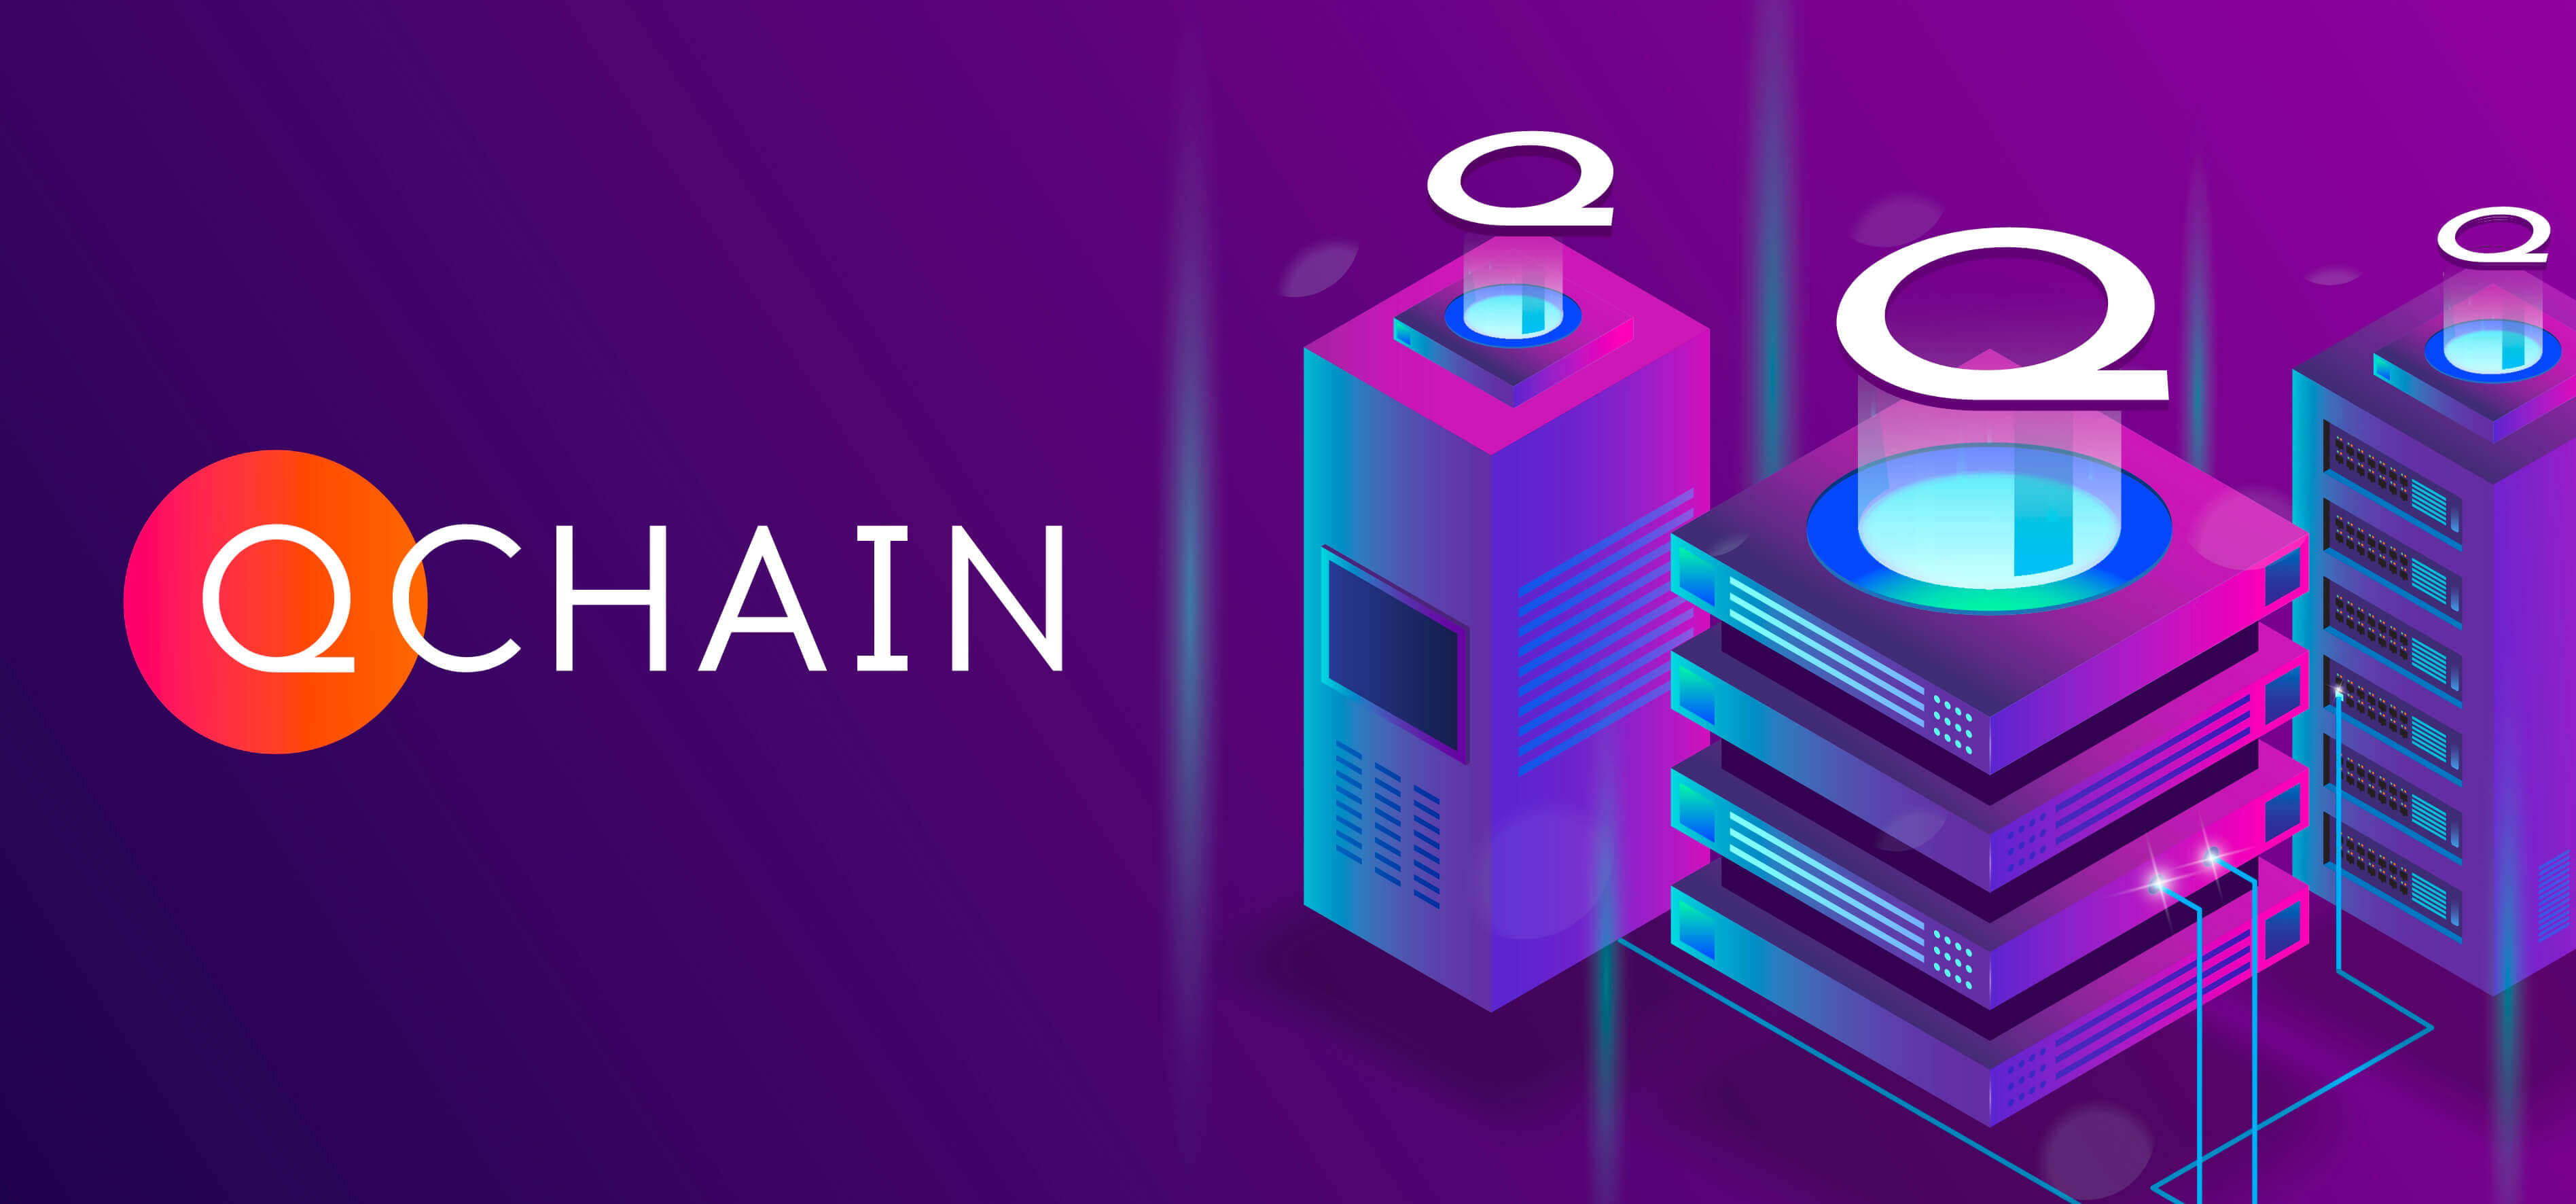 The next stage of the Qchain update has been completed